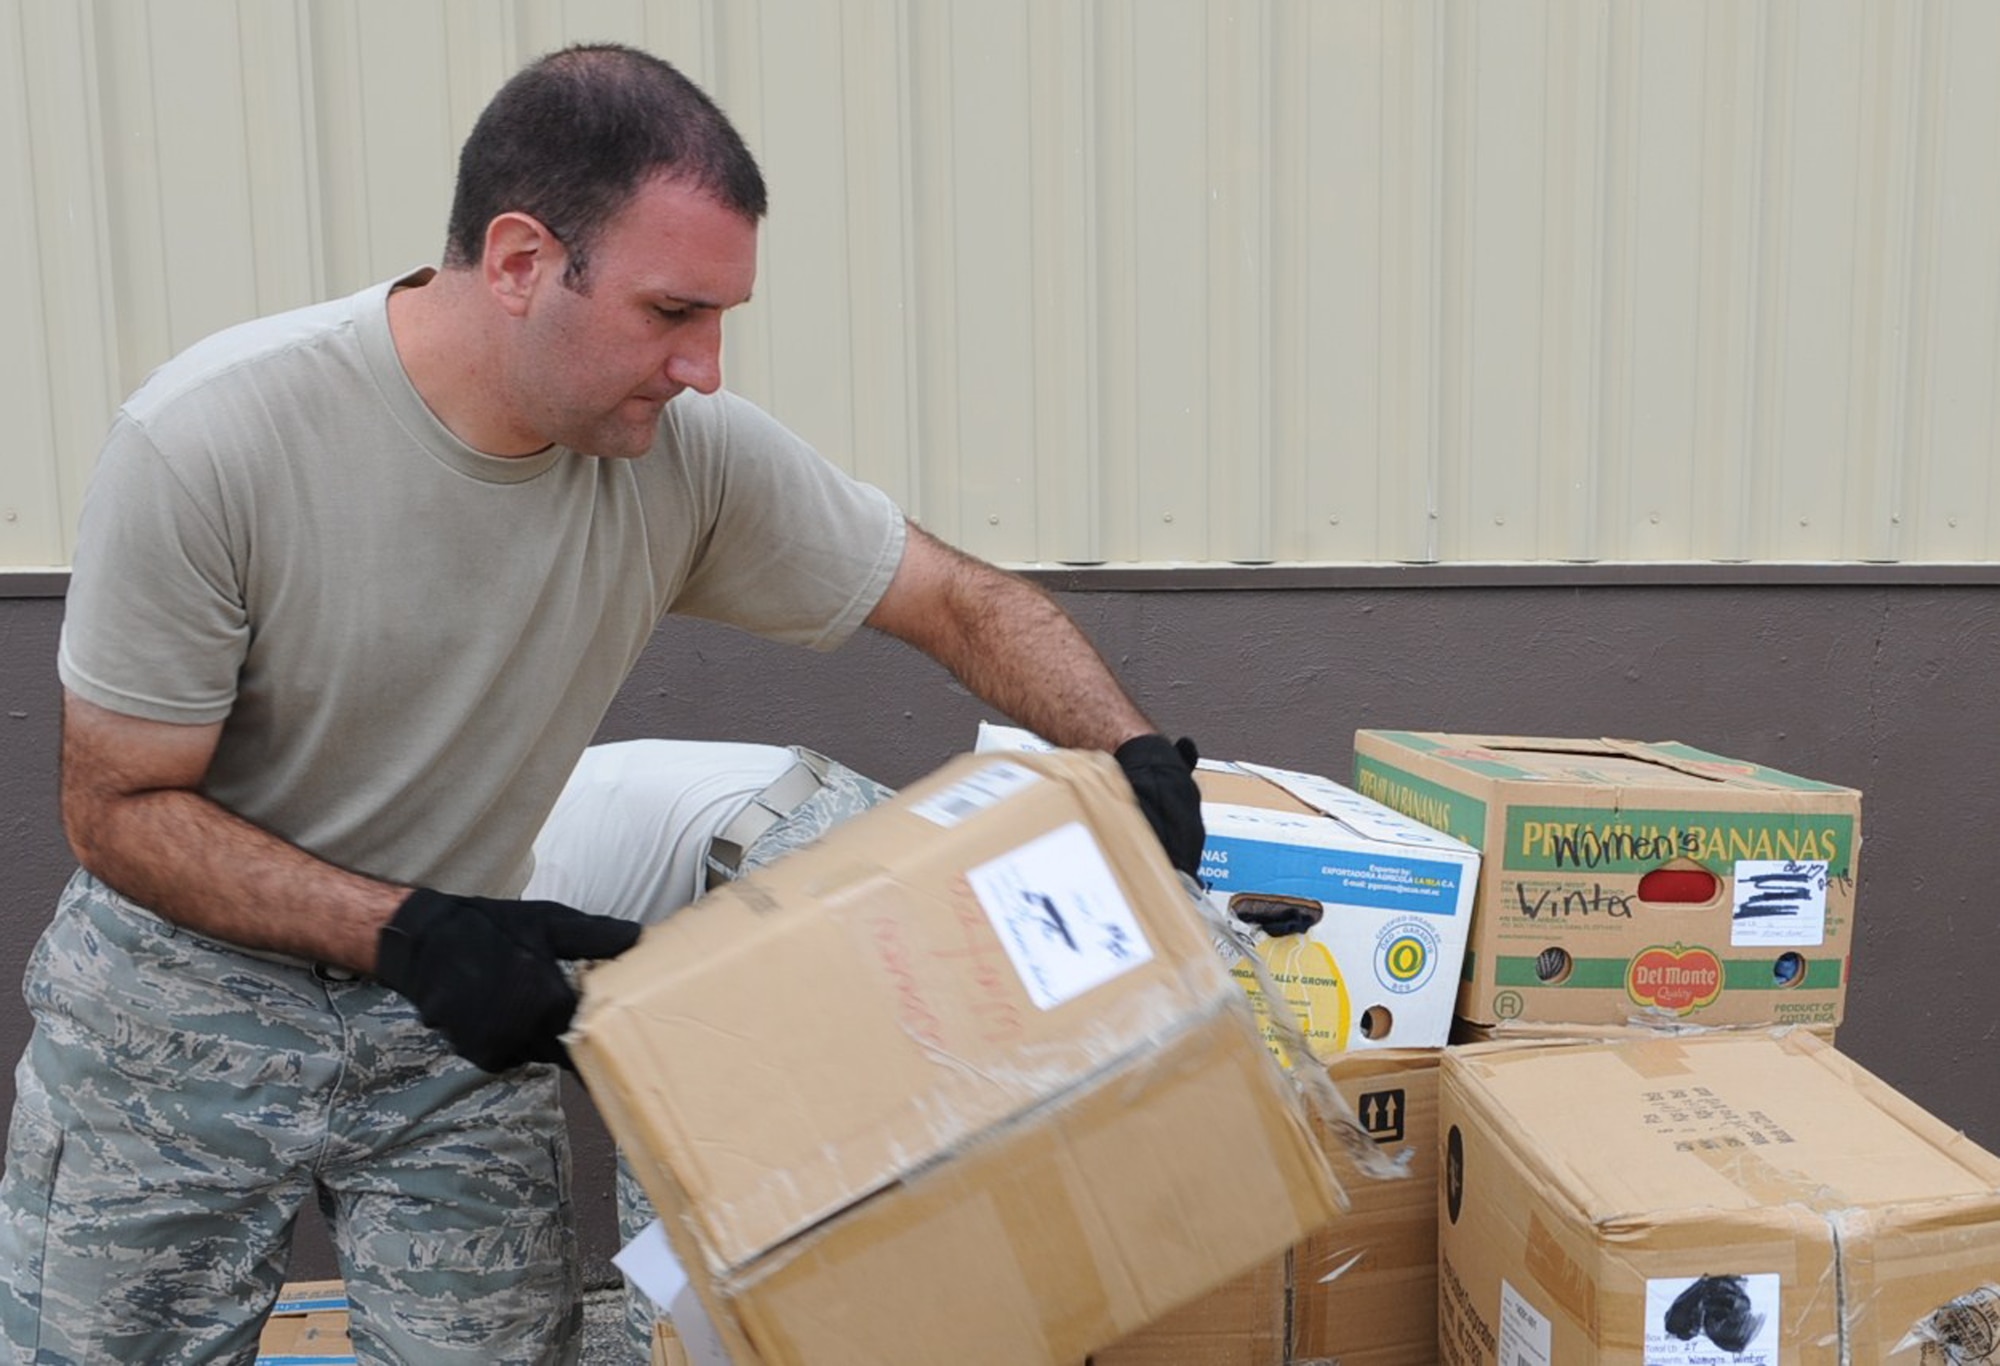 GOLDSBORO, N.C. -- Staff Sgt. Justin Smilo organizes pallets of donated food and clothing at the MERCI Mission Center Aug. 20, 2010. The pallets will go to Afghanistan for distribution during humanitarian missions. Sergeant Smilo, 4th Logistic Readiness Squadron air terminal operations, hails from Easton, Conn. (U.S. Air Force photo/Senior Airman Gino Reyes)